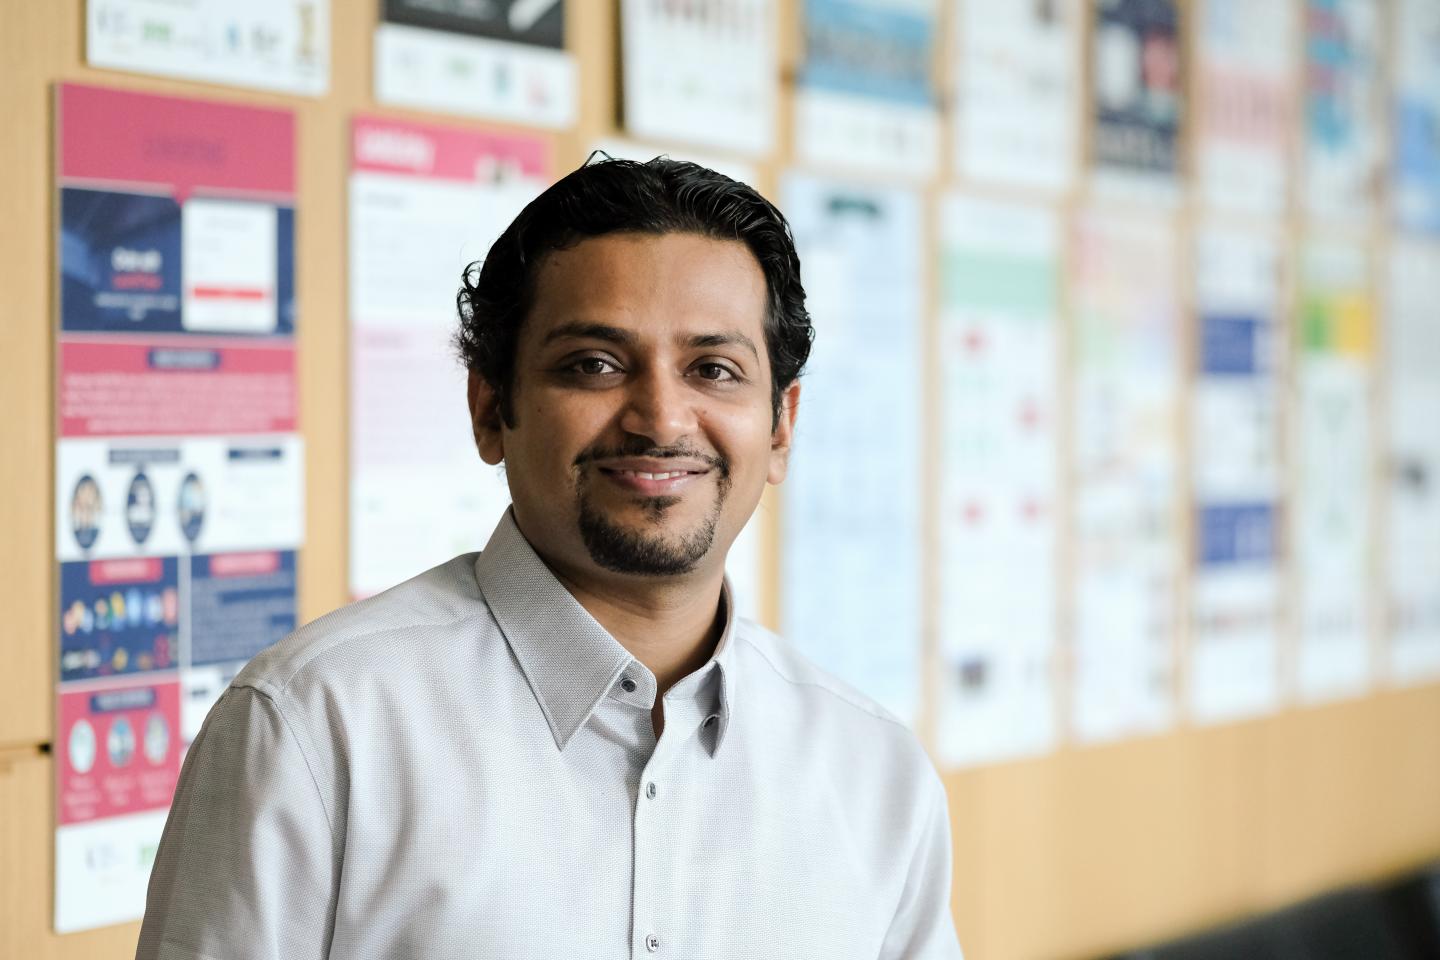 Assistant Professor Akshat Kumar from the School of Information Systems